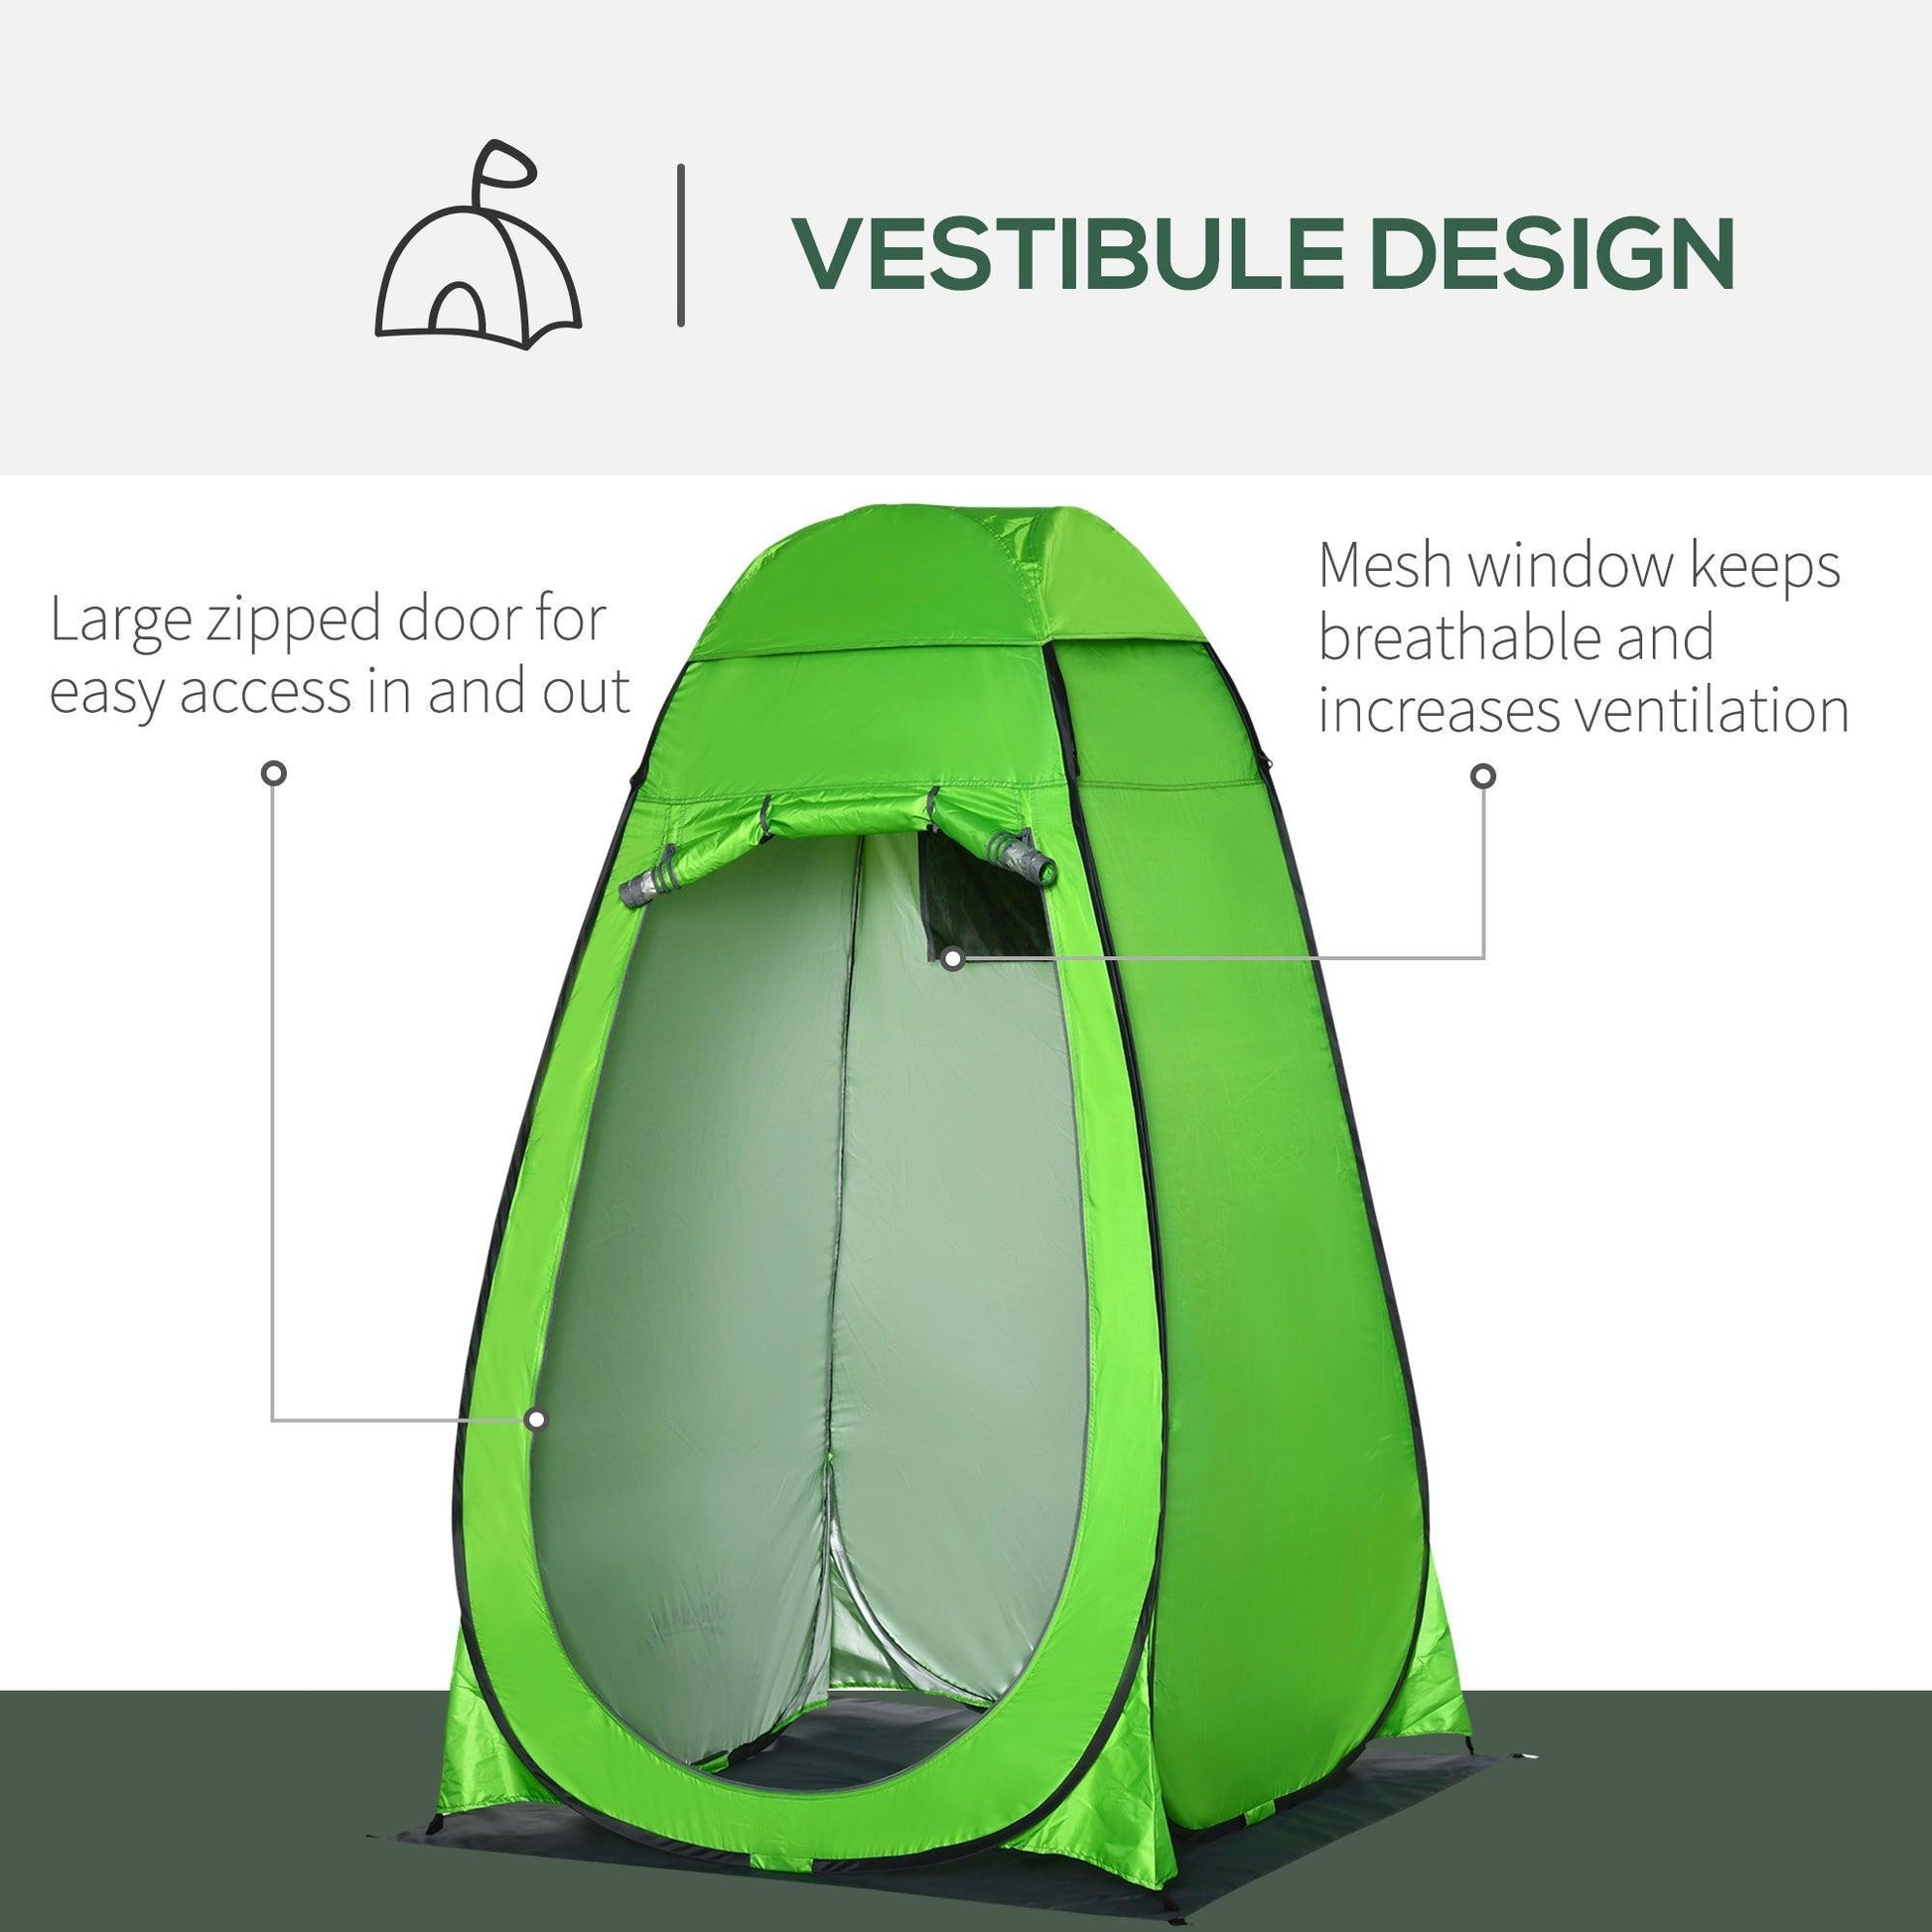 Outsunny Portable Outdoor Shower and Toilet Tent - Green - ALL4U RETAILER LTD